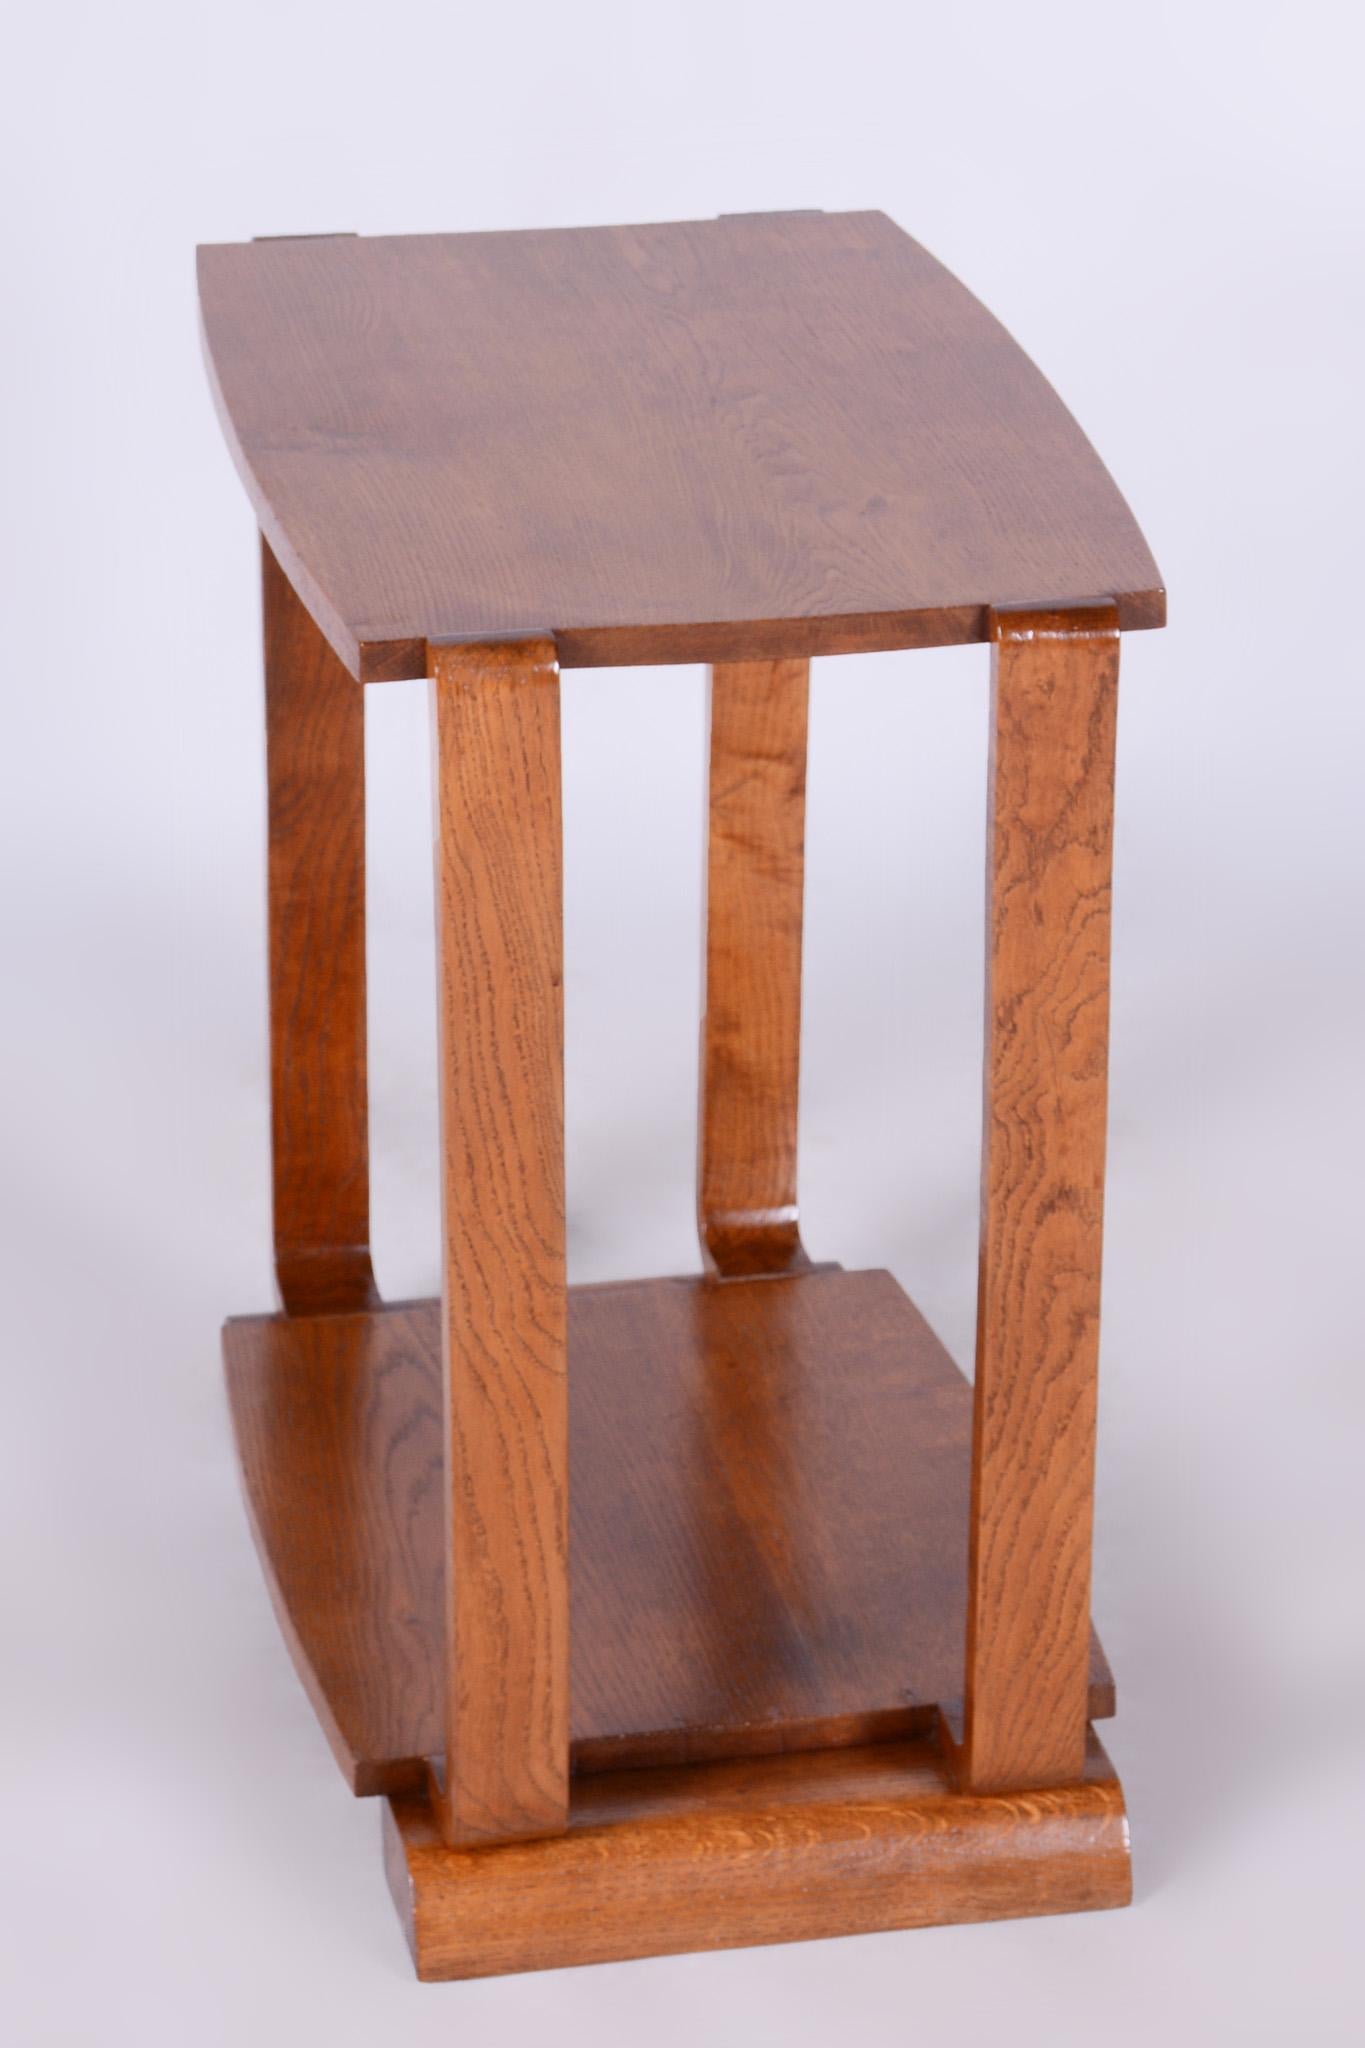 Restored Walnut Art Deco Side Table Made in 1930s, France, Revived Polish For Sale 4